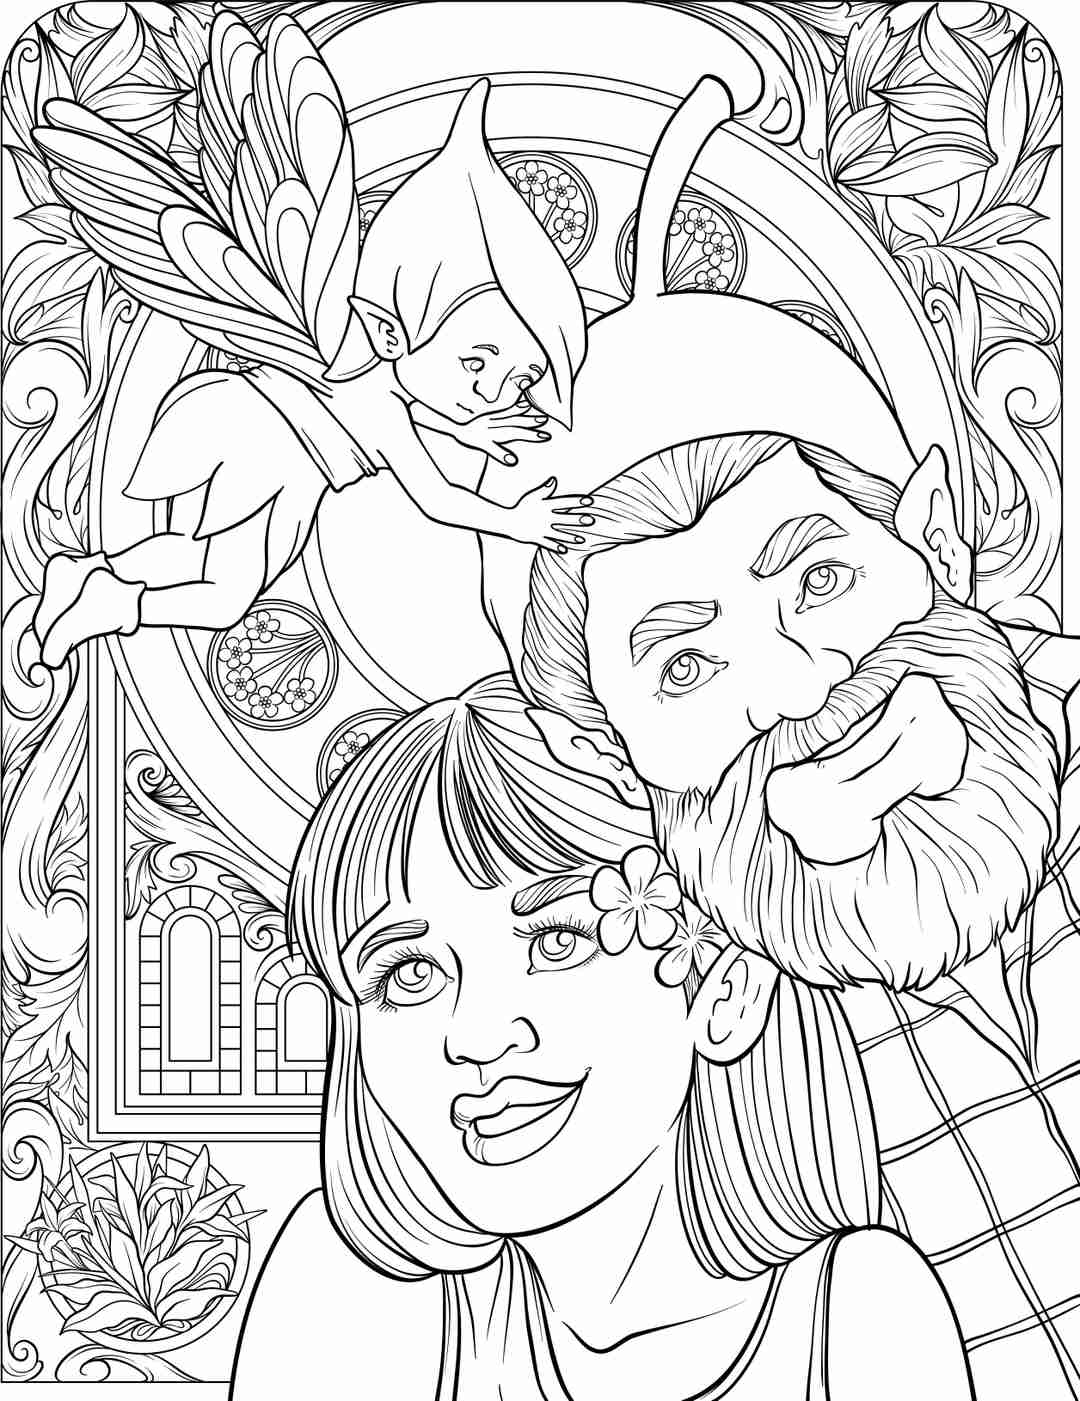 ColorIt Coloring Books Group Freebie 02-15-21